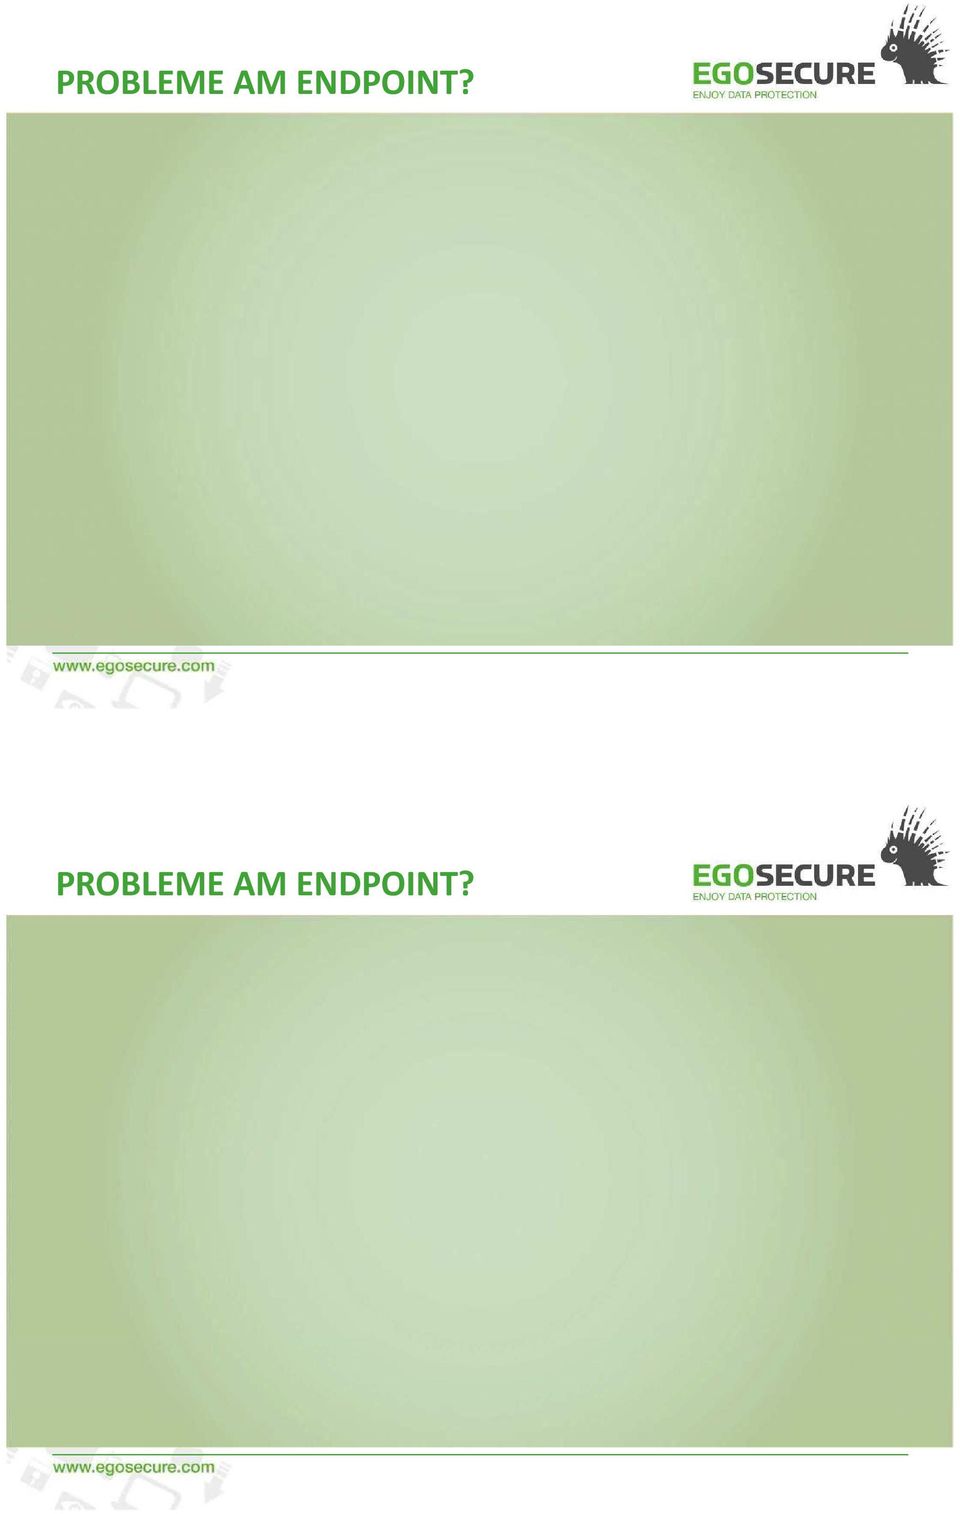 ENDPOINT?